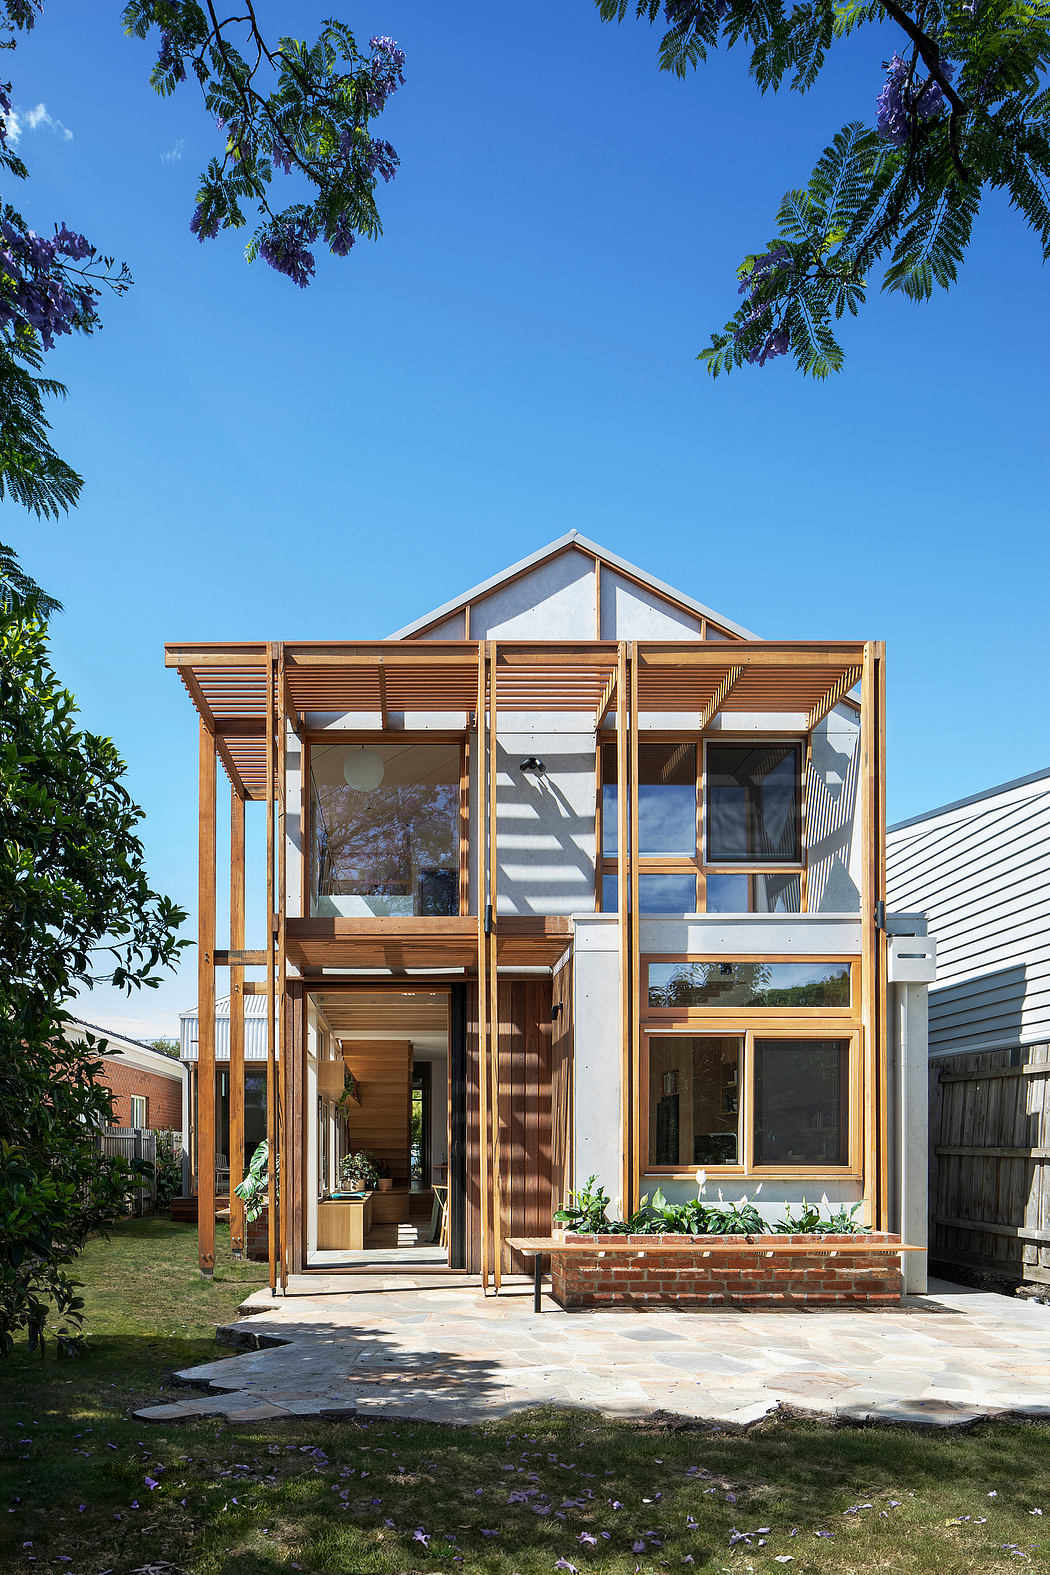 A modern home with wooden framing, large windows, and a covered porch. The exterior features a mix of natural materials and a minimalist design.